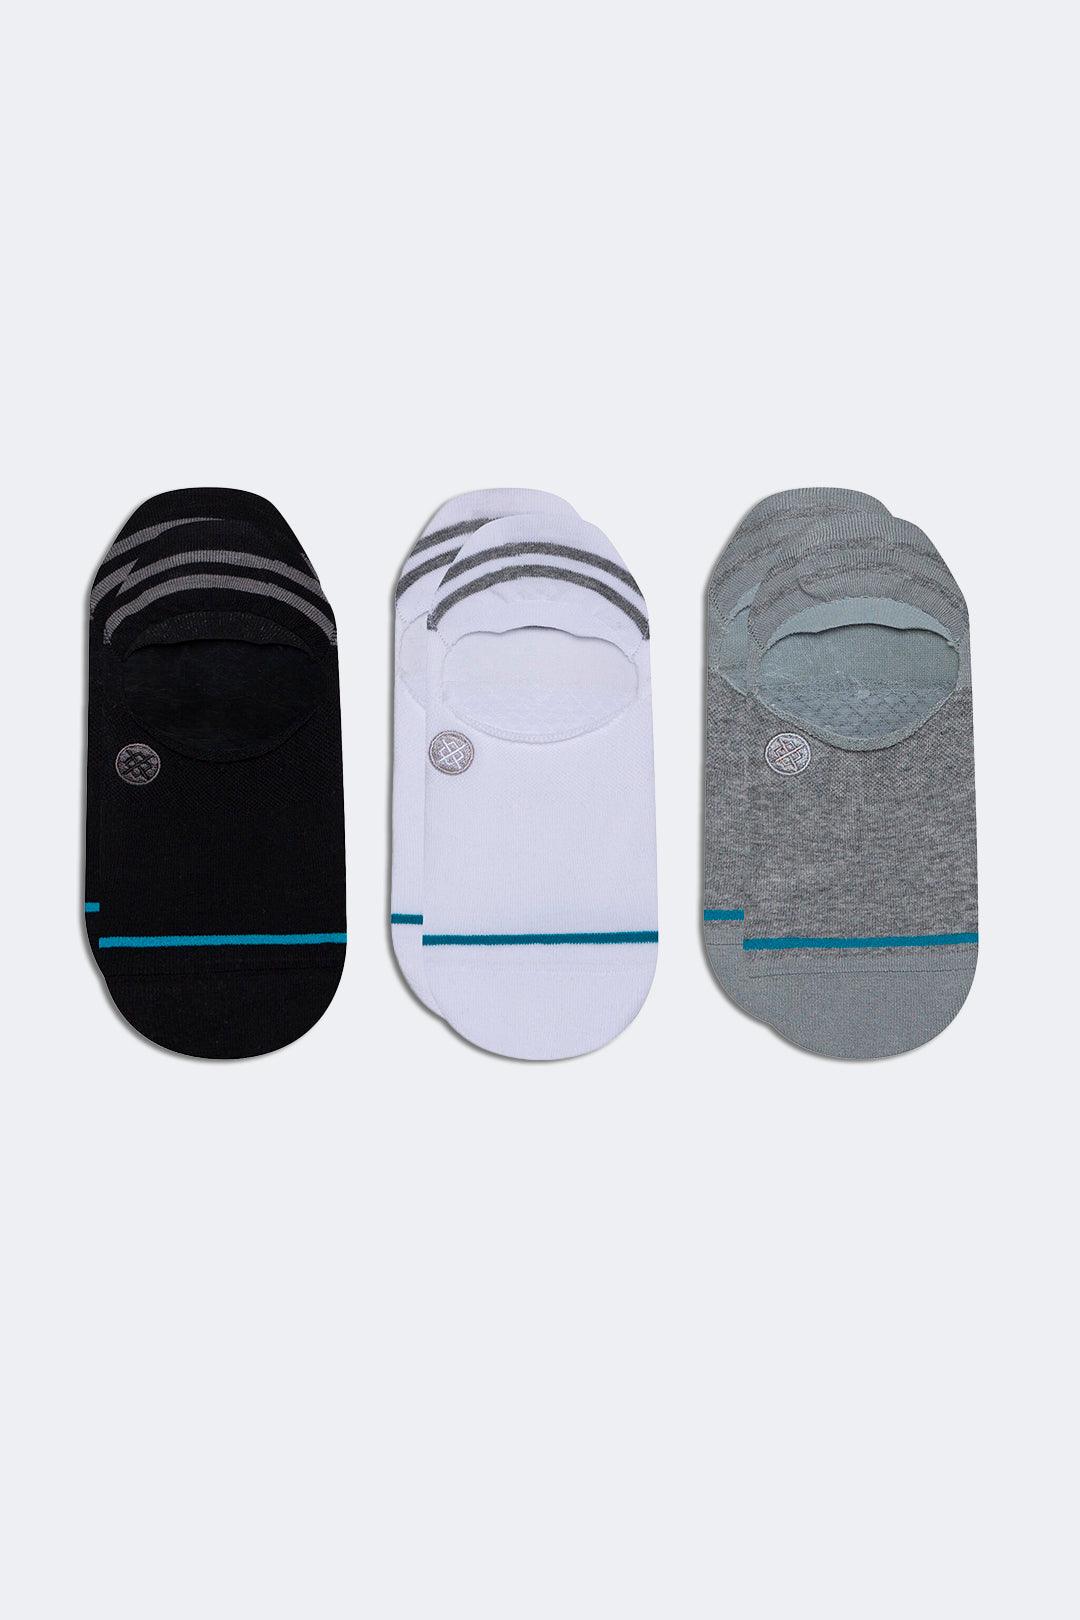 STANCE MEDIAS SENSIBLE TWO 3 PACK - HYPE